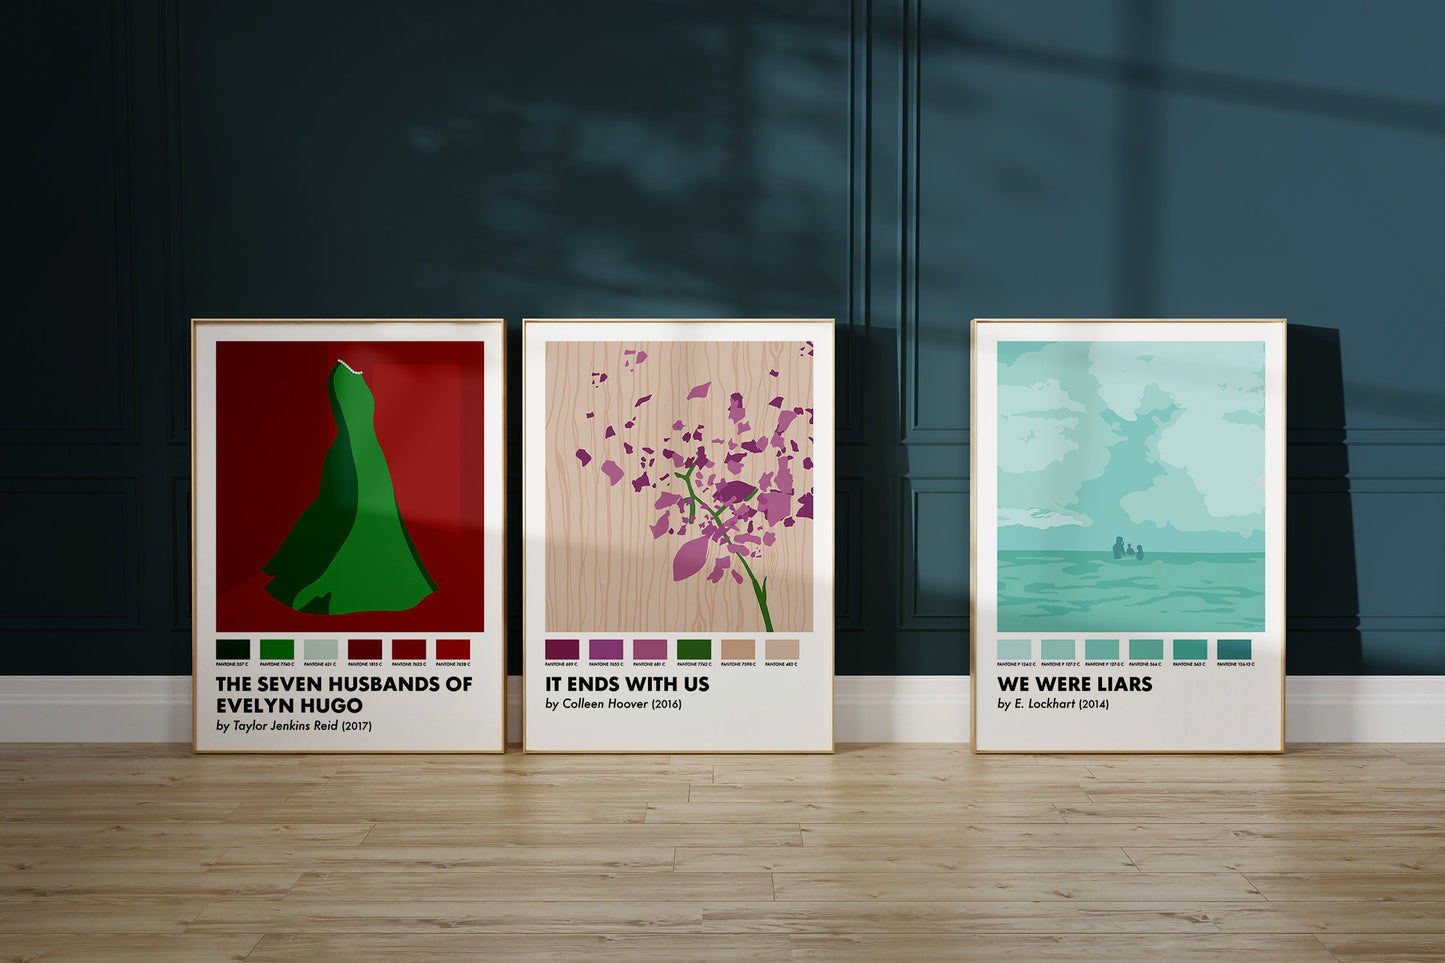 It Ends With Us Inspired Art Print - The Pantone Collection